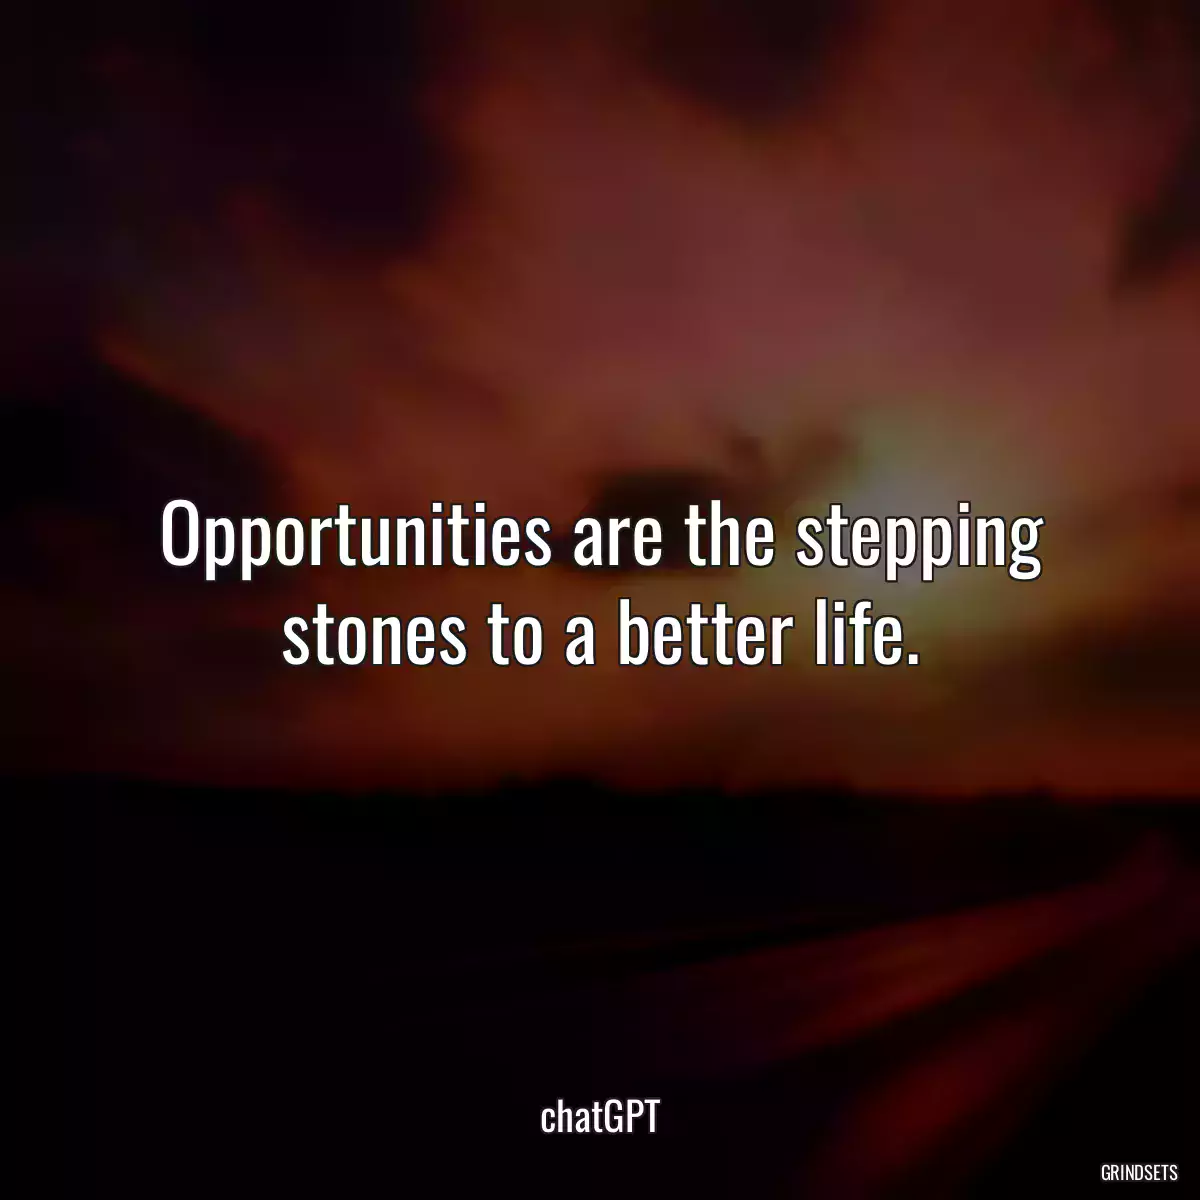 Opportunities are the stepping stones to a better life.